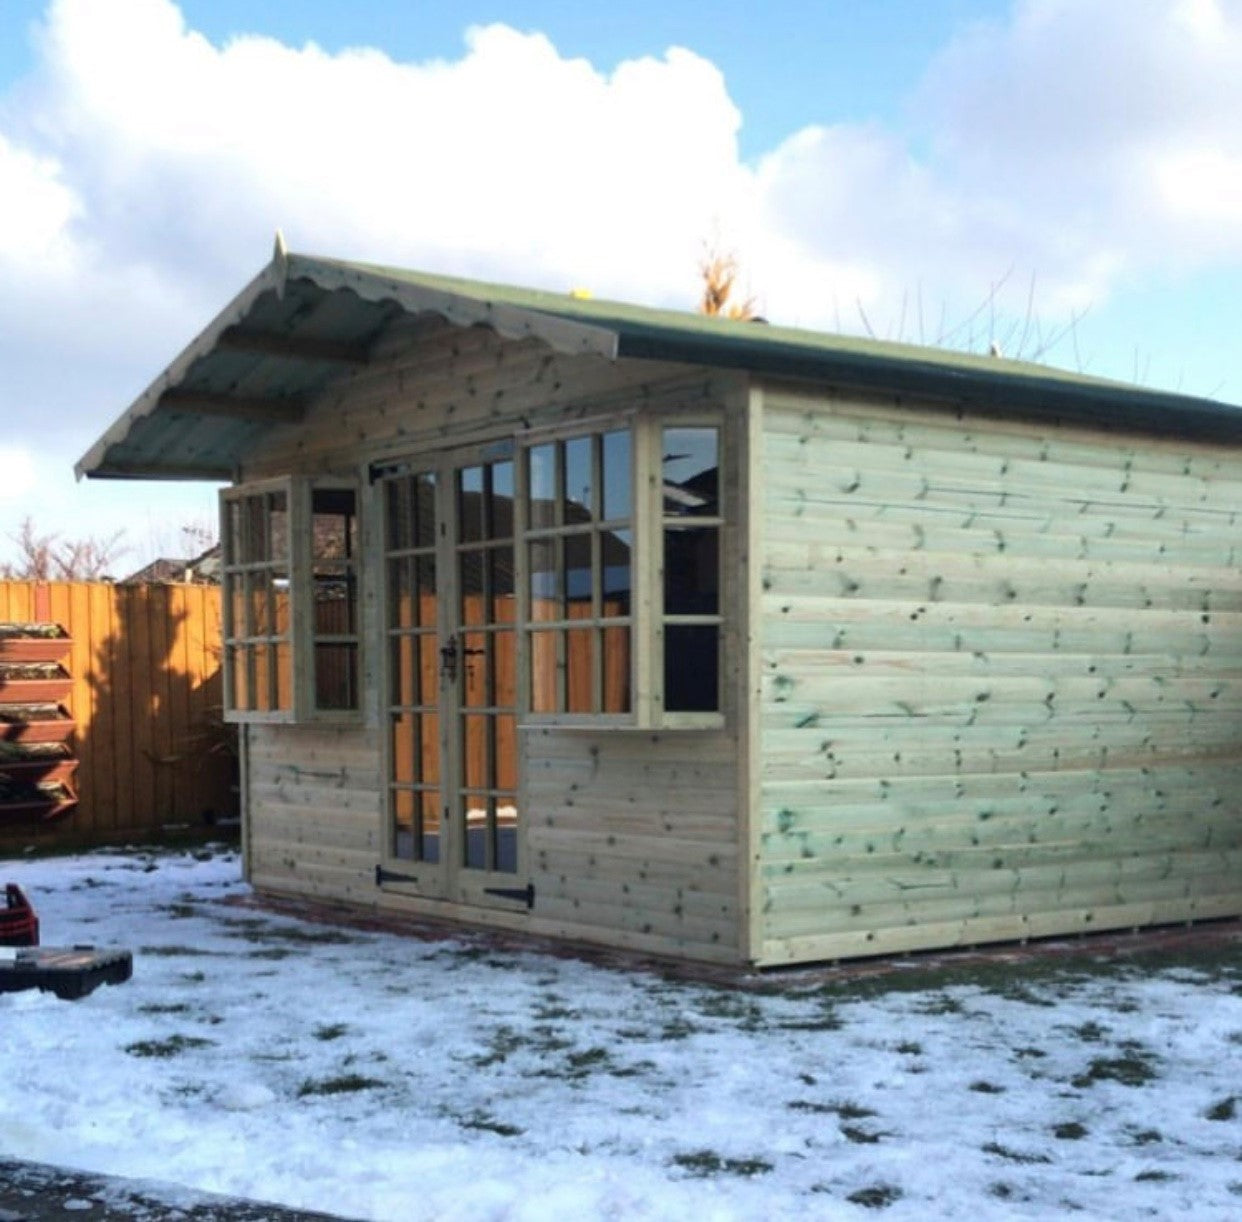 Tanalised The Windermere Summerhouse Keighley Timber & Fencing sheds www.keighleytimbersheds.co.uk